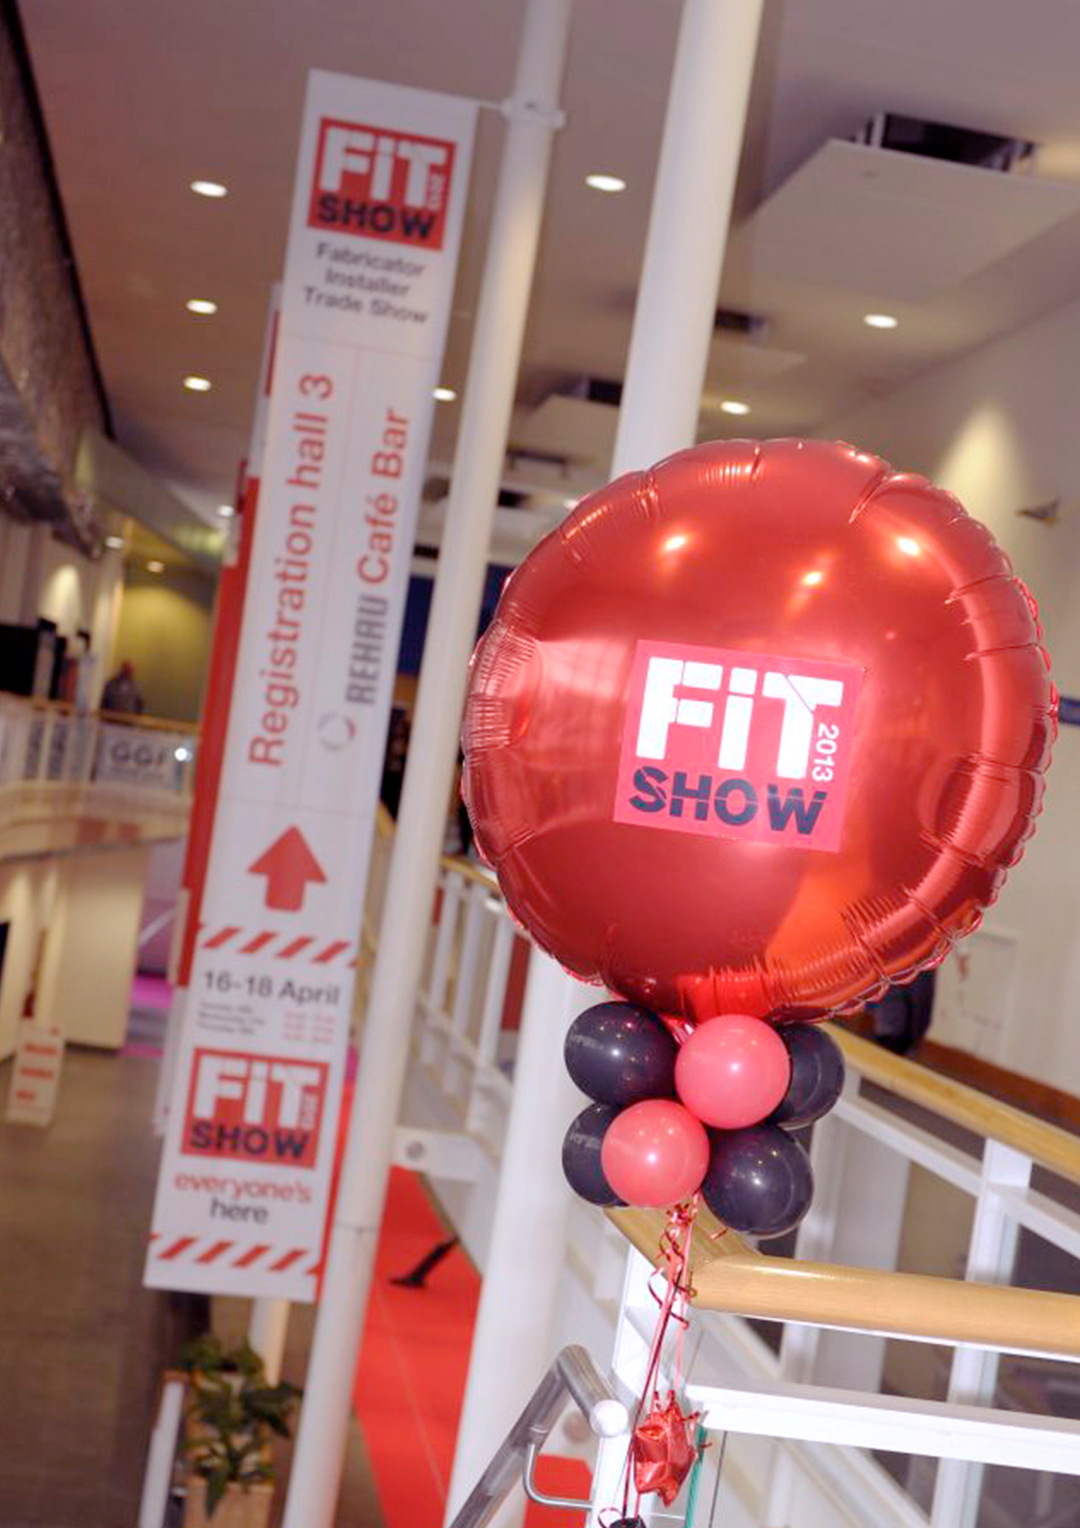 The FIT Show Event. Branding. Creative artwork and graphic design.